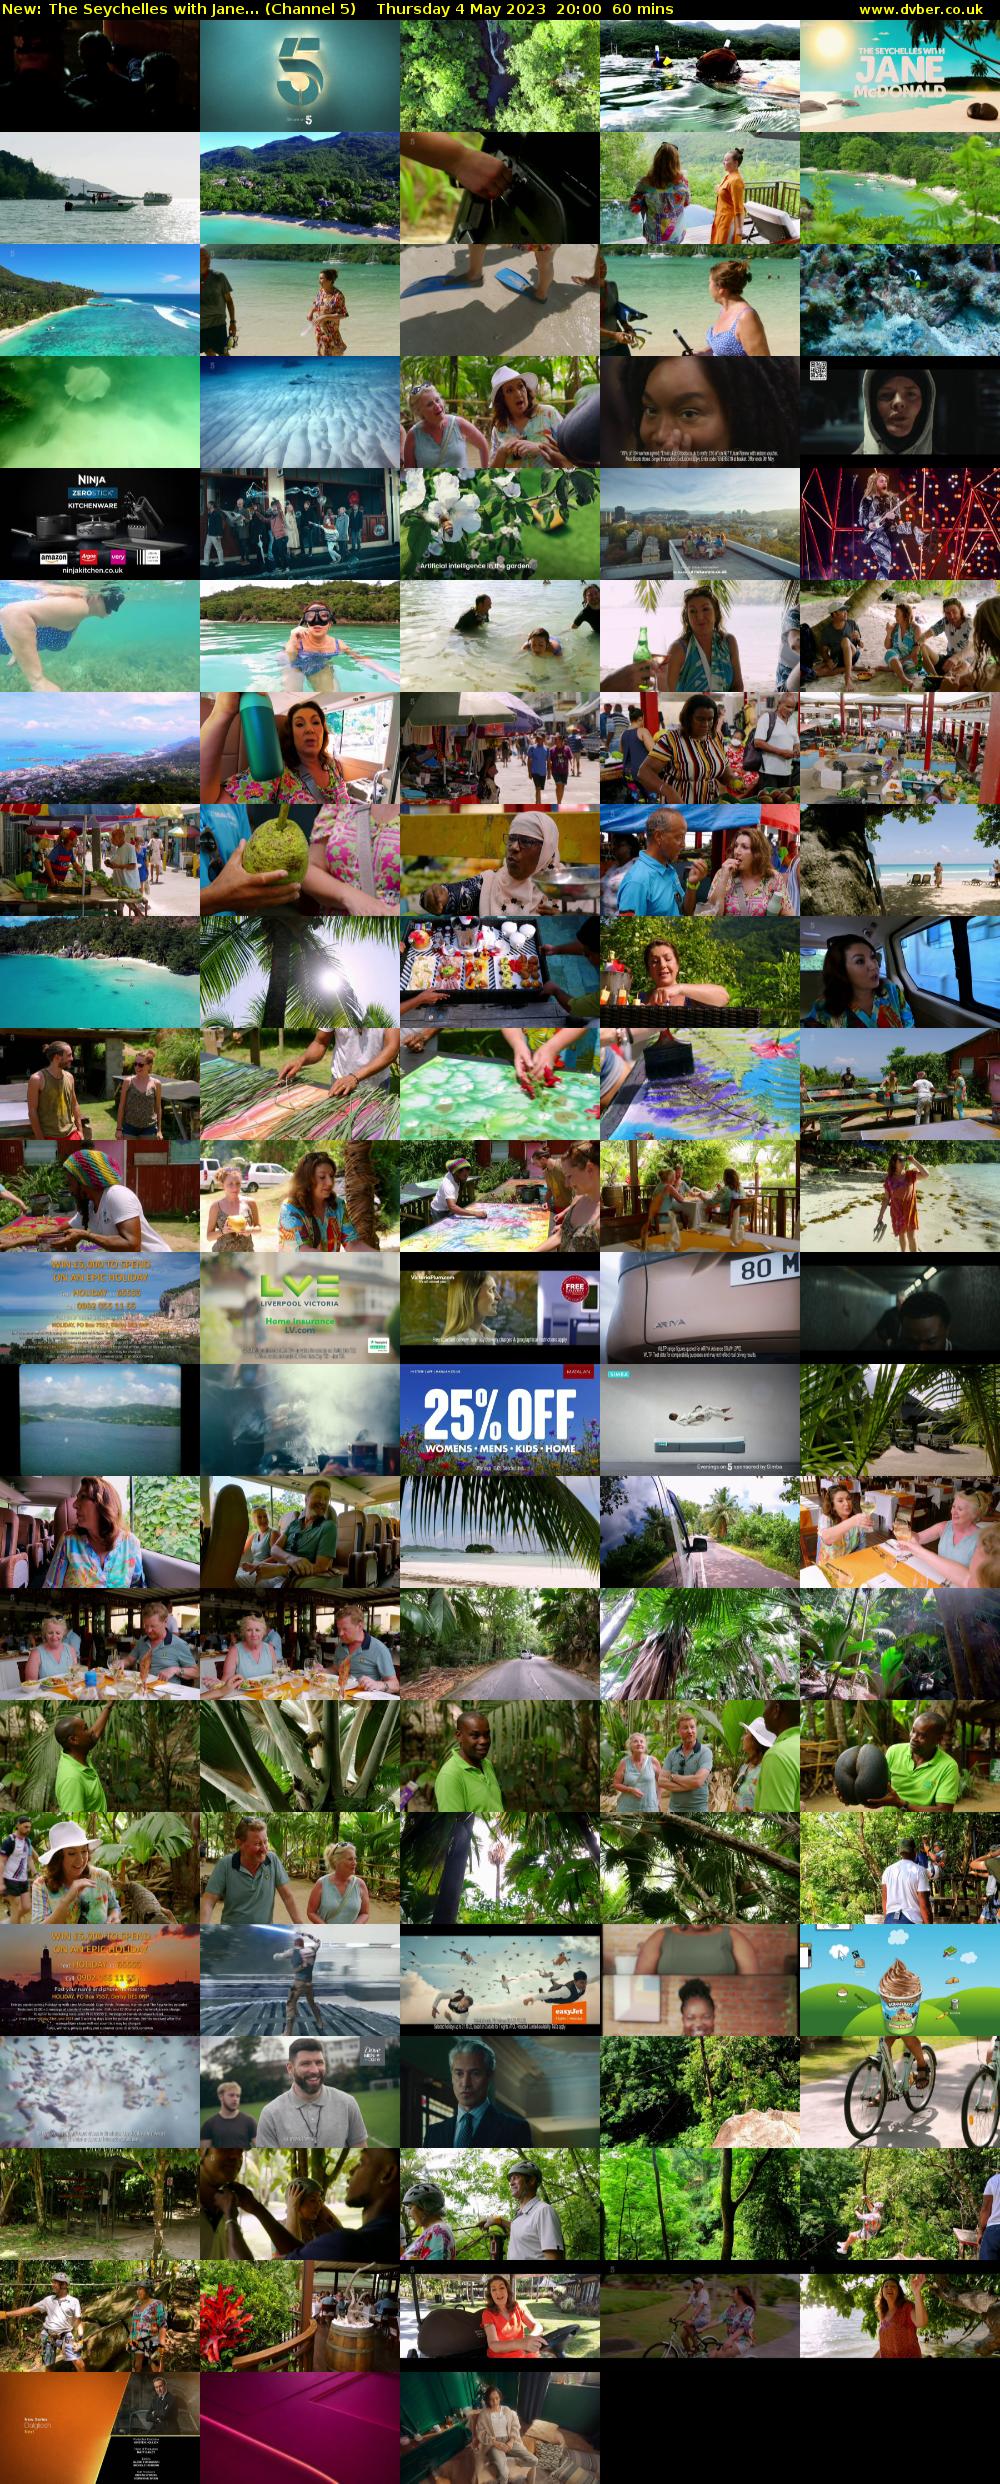 The Seychelles with Jane... (Channel 5) Thursday 4 May 2023 20:00 - 21:00